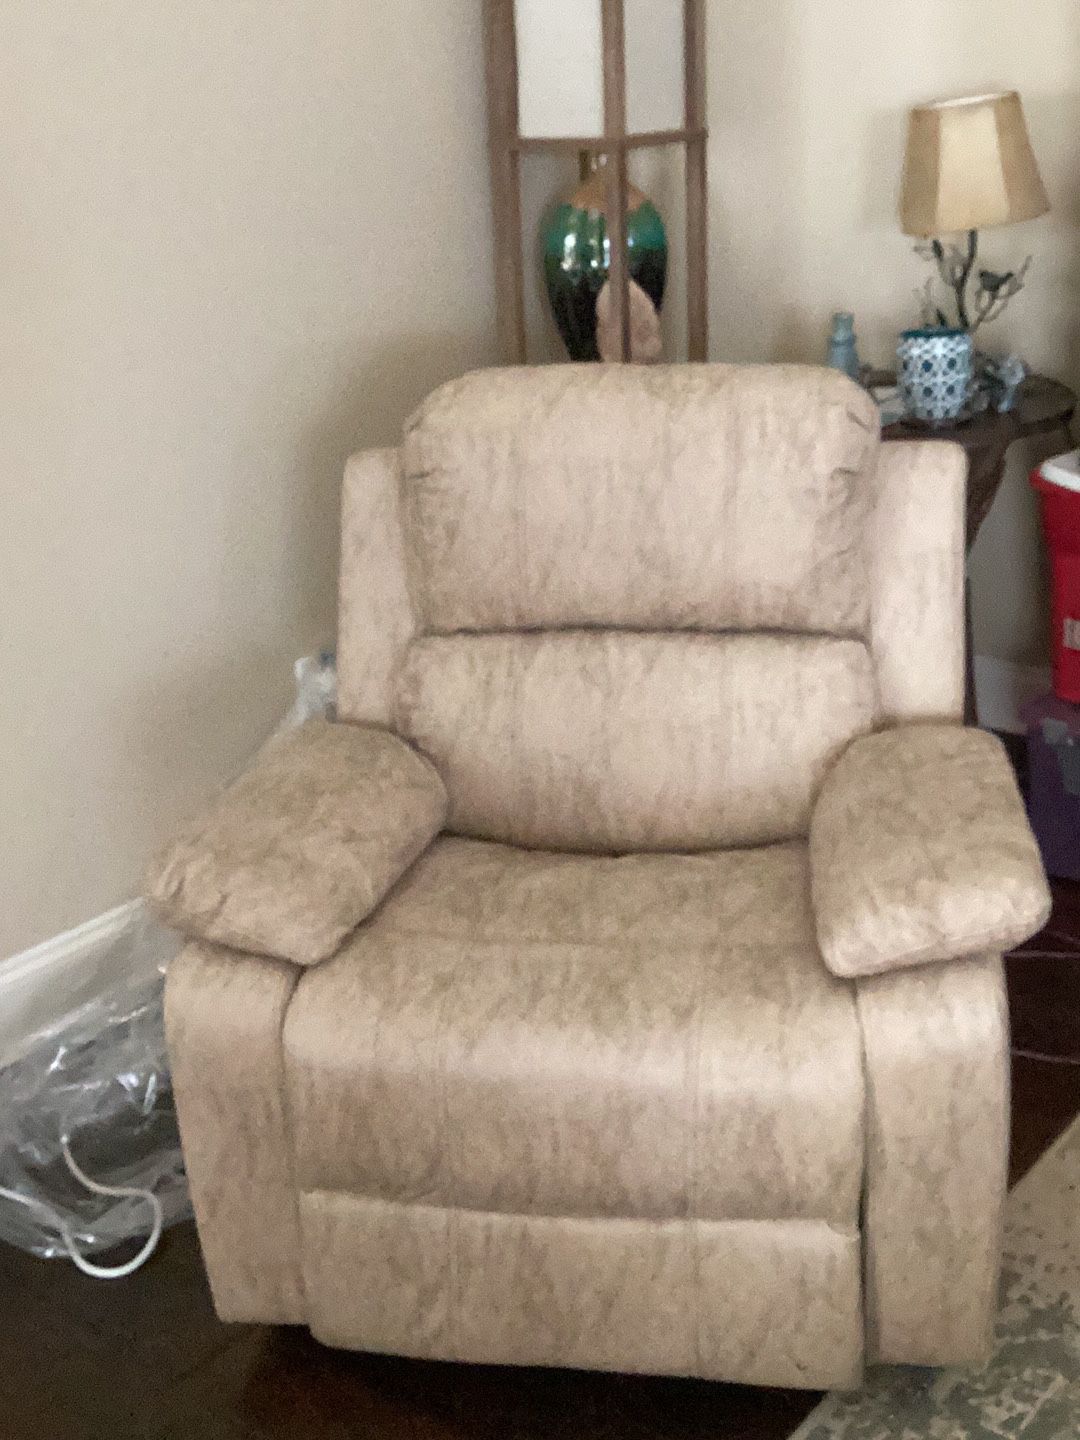 Recliner . Out Of The The Box! Never Used!